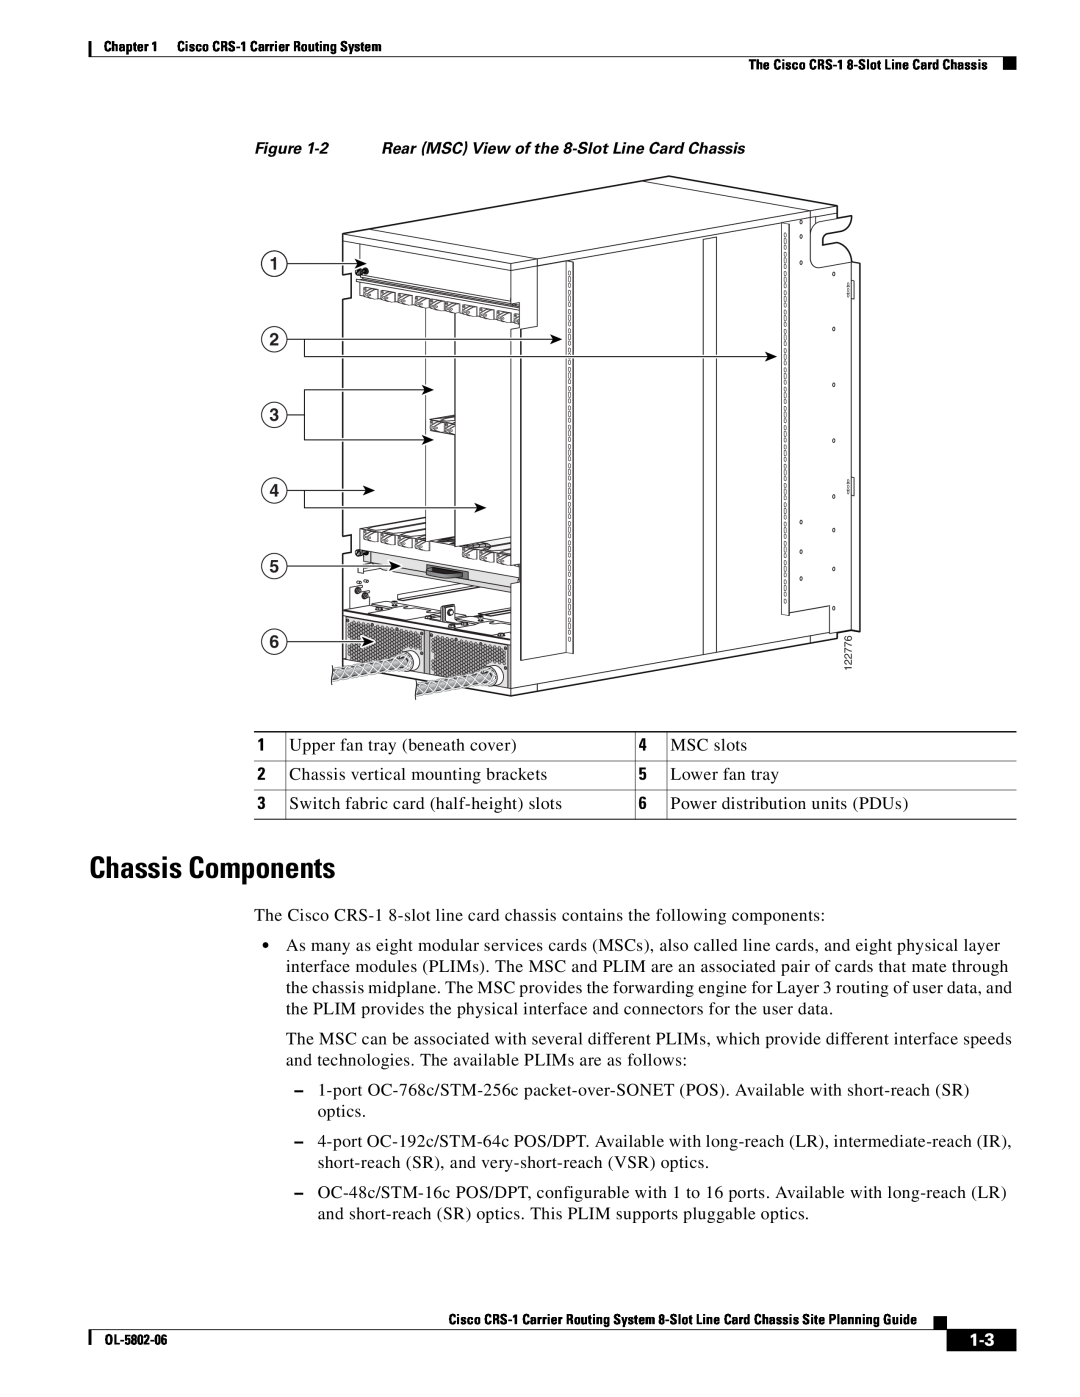 Cisco Systems CRS-1 manual Chassis Components, 2 Rear MSC View of the 8-Slot Line Card Chassis 